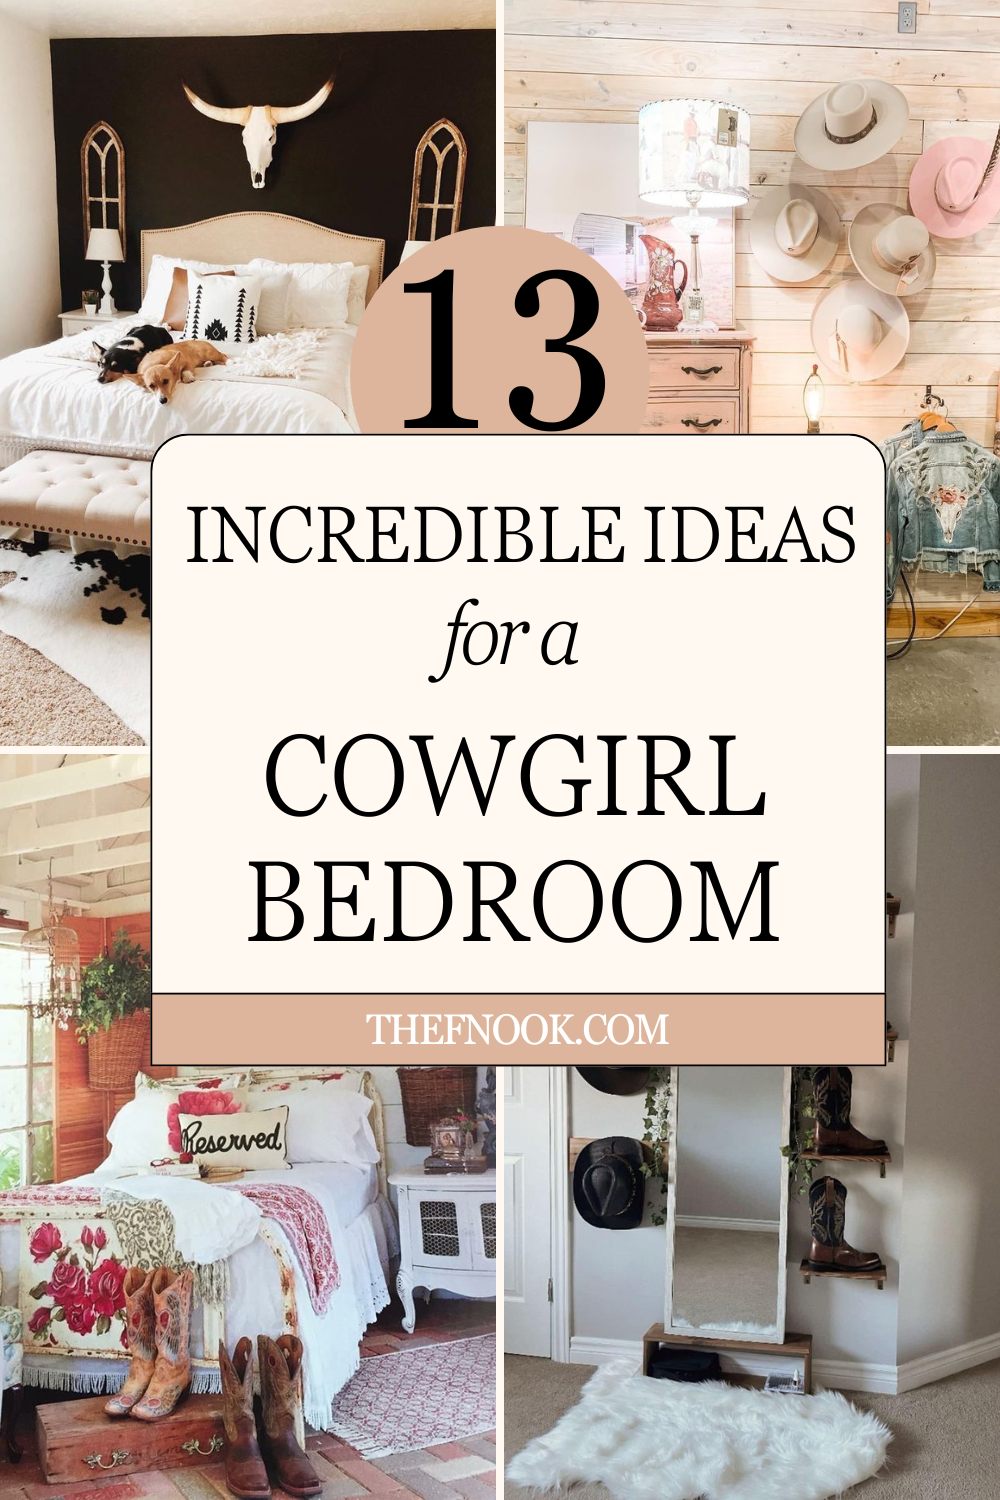 13 Incredible Ideas for a Cowgirl Bedroom Decor You’ll Love